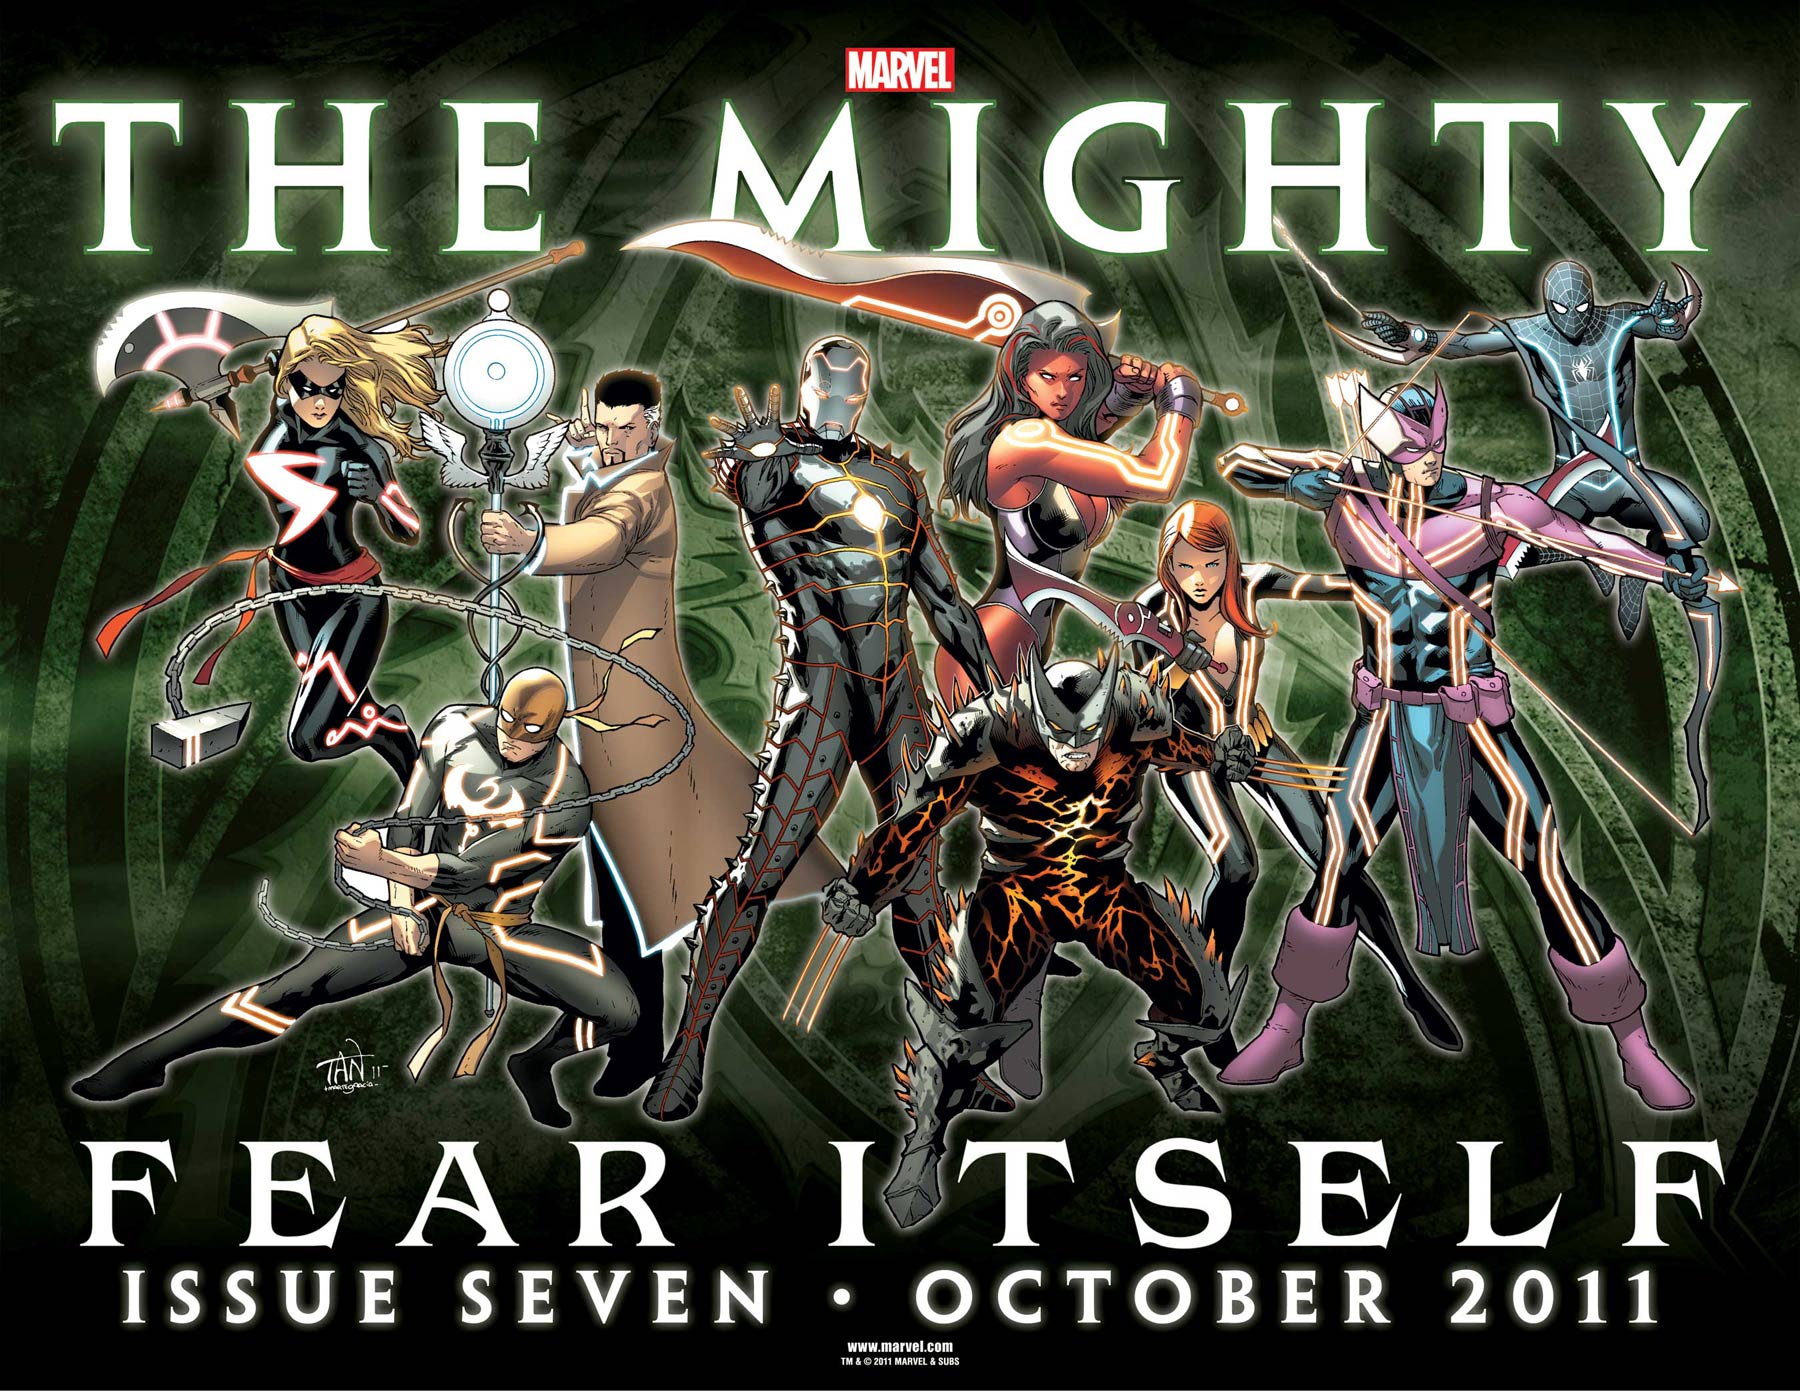 FEAR ITSELF #7 "The Mighty" preview